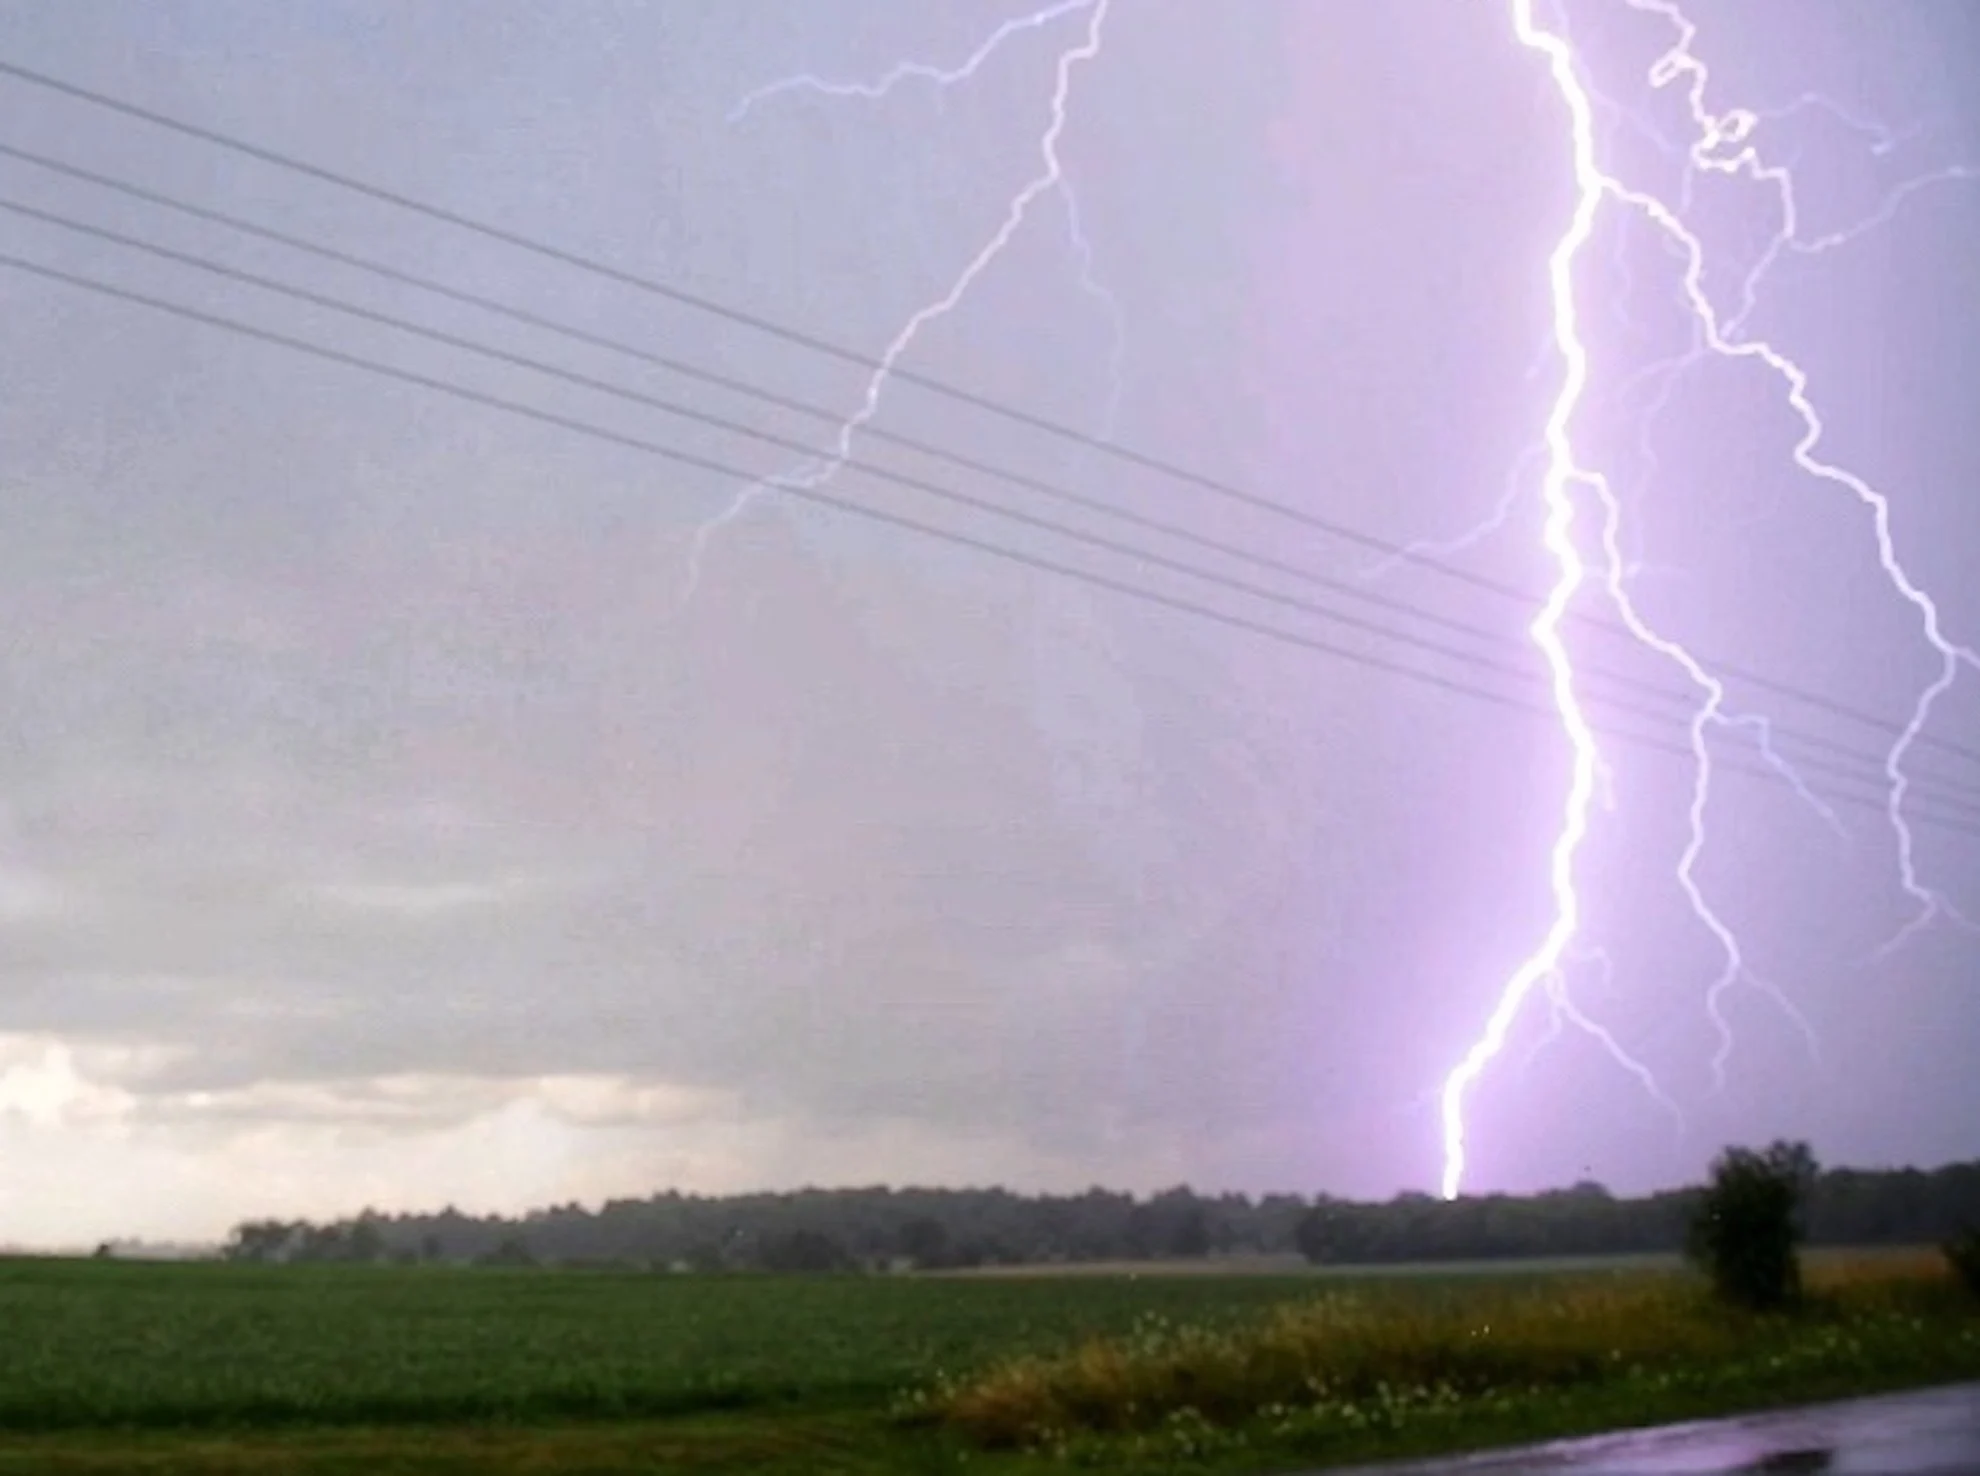 At least 22 people were injured in Liberec, Czech Republic, Sunday after lightning hit a tree